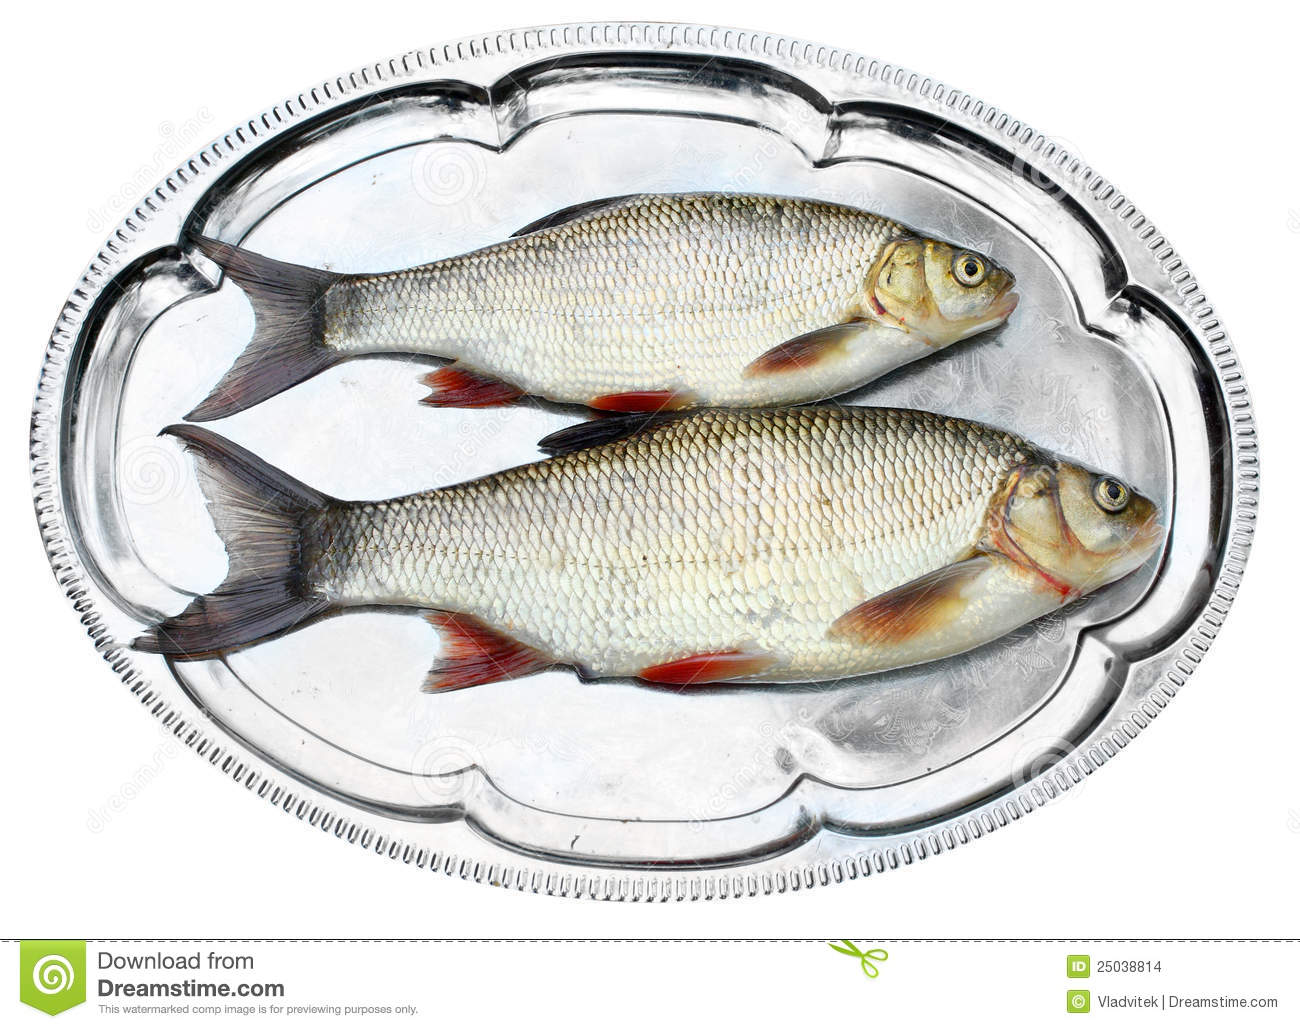 Related Fish Dinner Clipart Cooked Fish Clipart Fried Fish Dinner Fish    